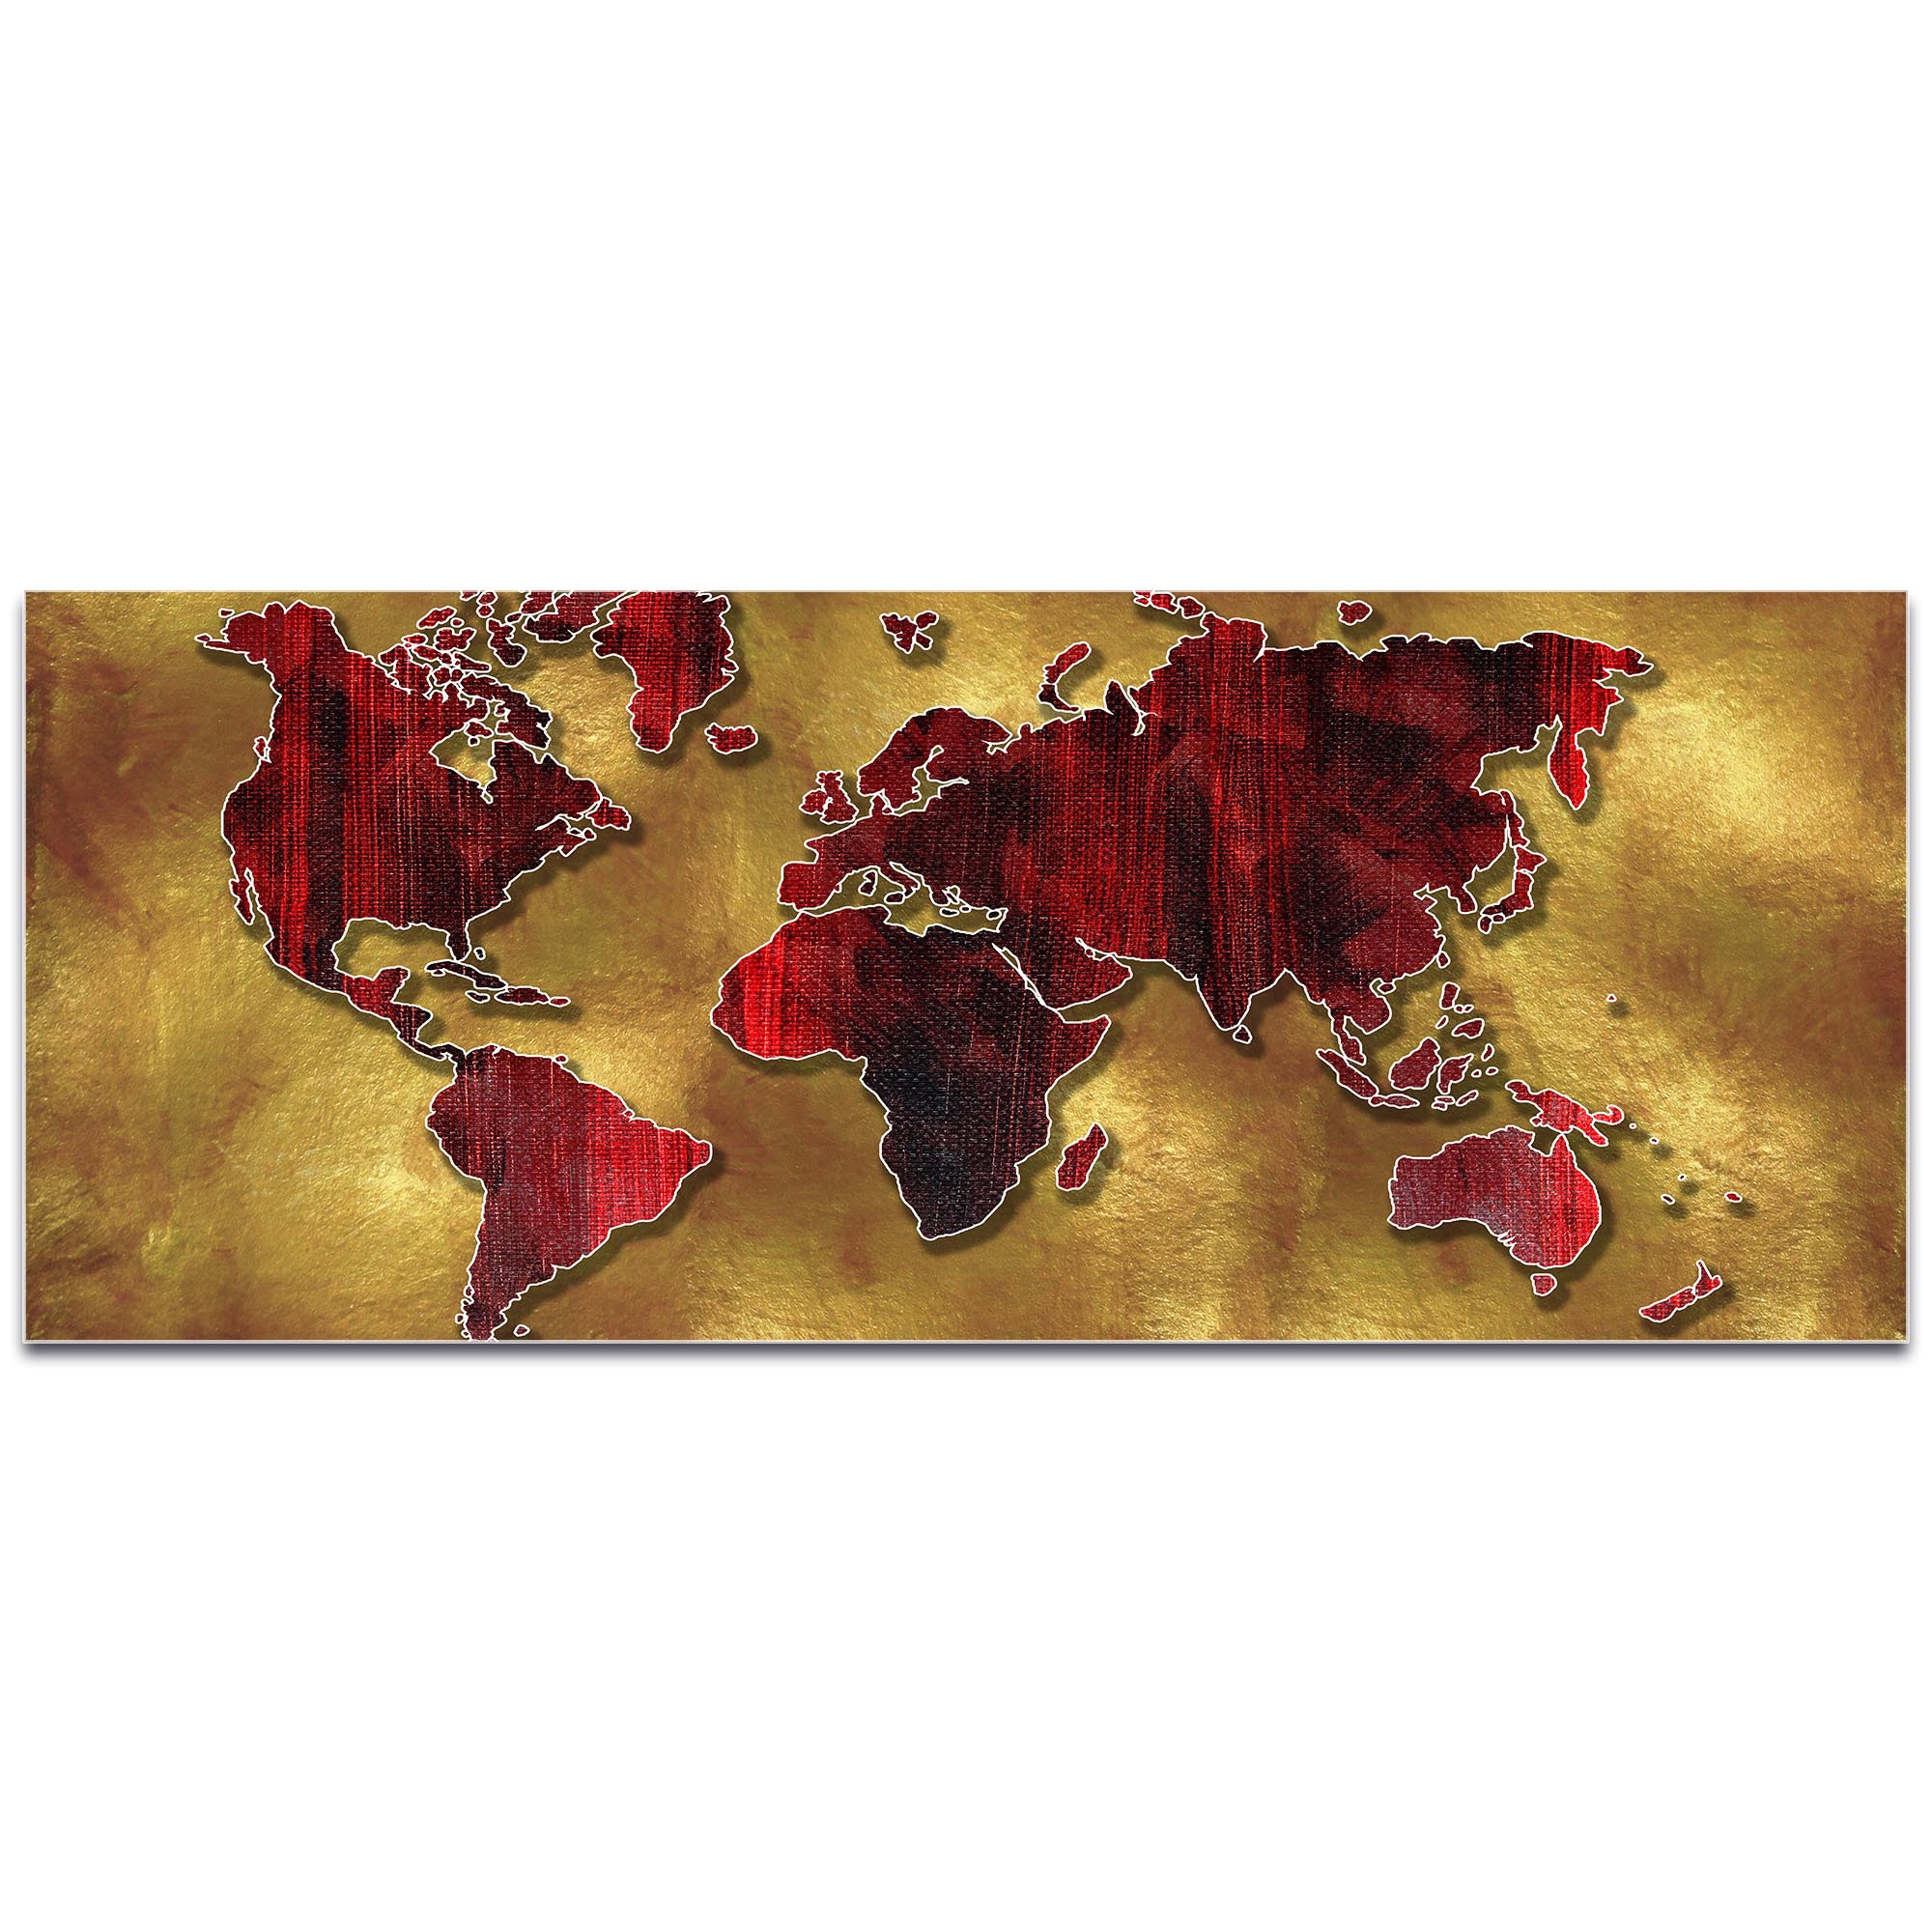 Eclectic World Map 'Golden World' - Modern Map Art on Metal or Acrylic - Image 2